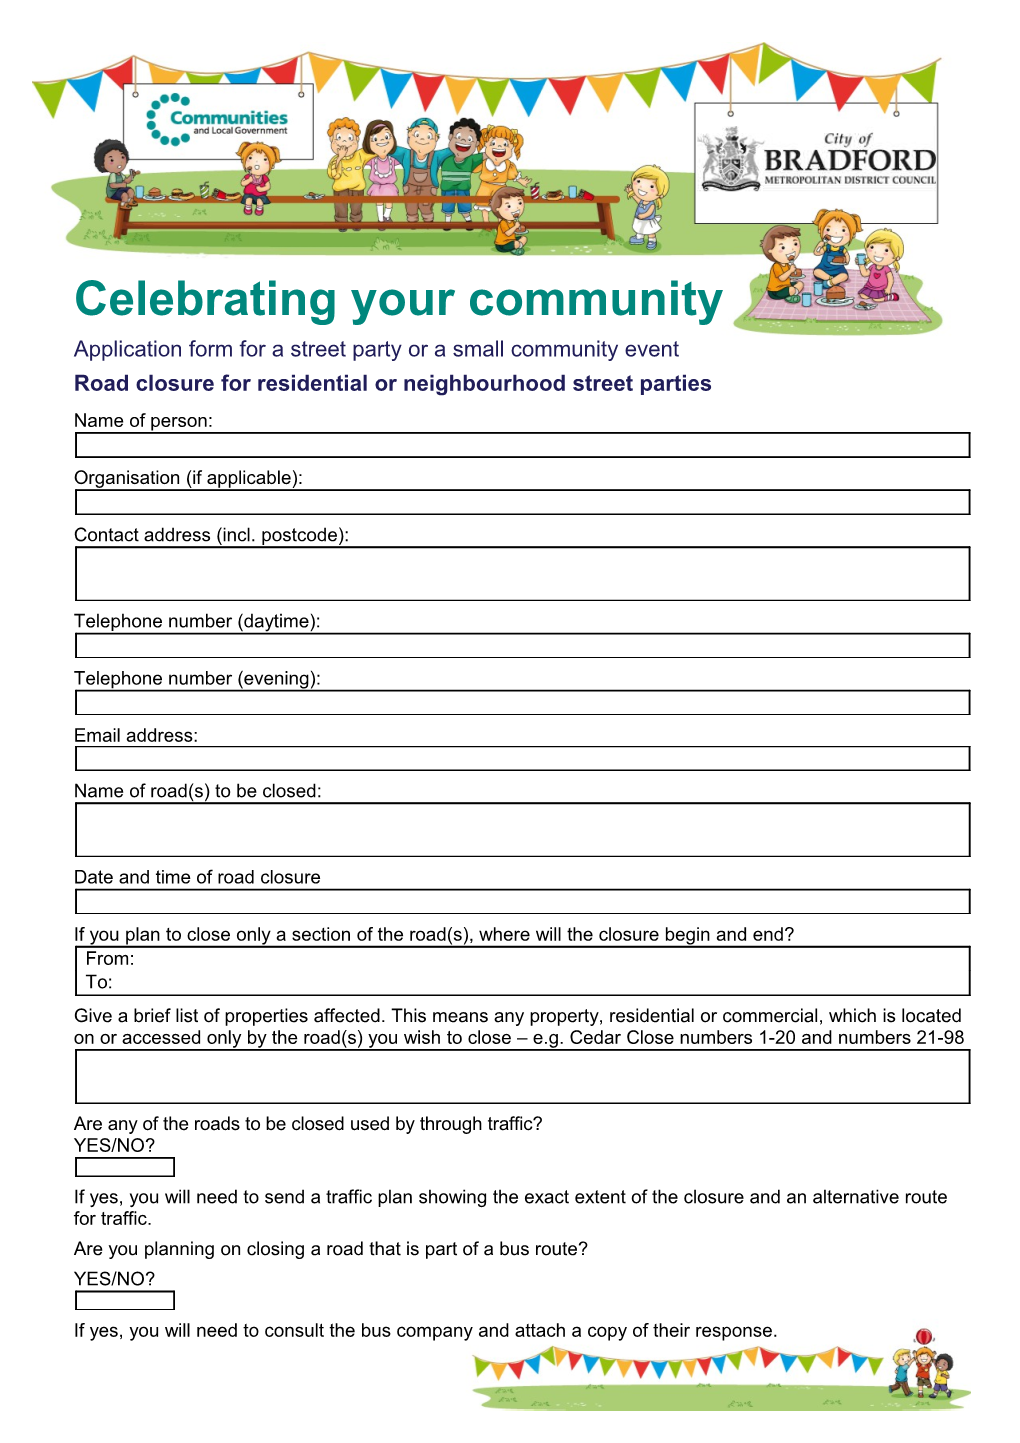 Bradford Council - Street Party Application Form